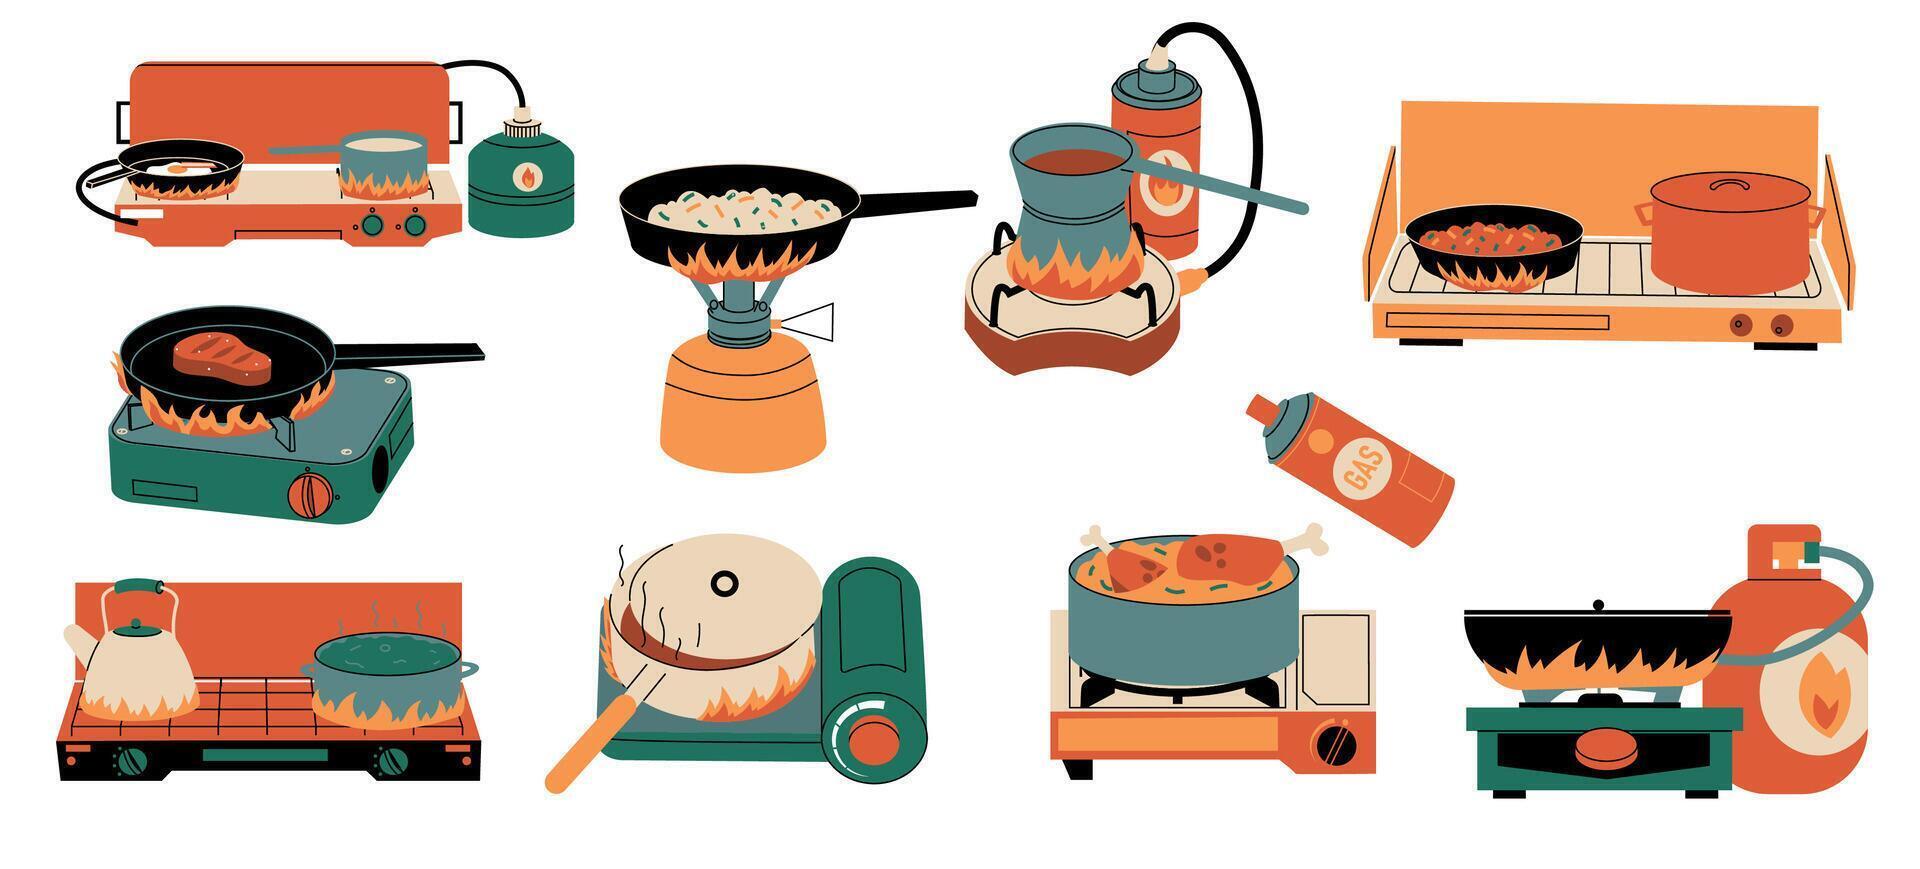 Food on stove. Cookery utensil for cooking stands on gas fire heater, kitchenware appliance on portable burner cartoon style. Vector isolated set